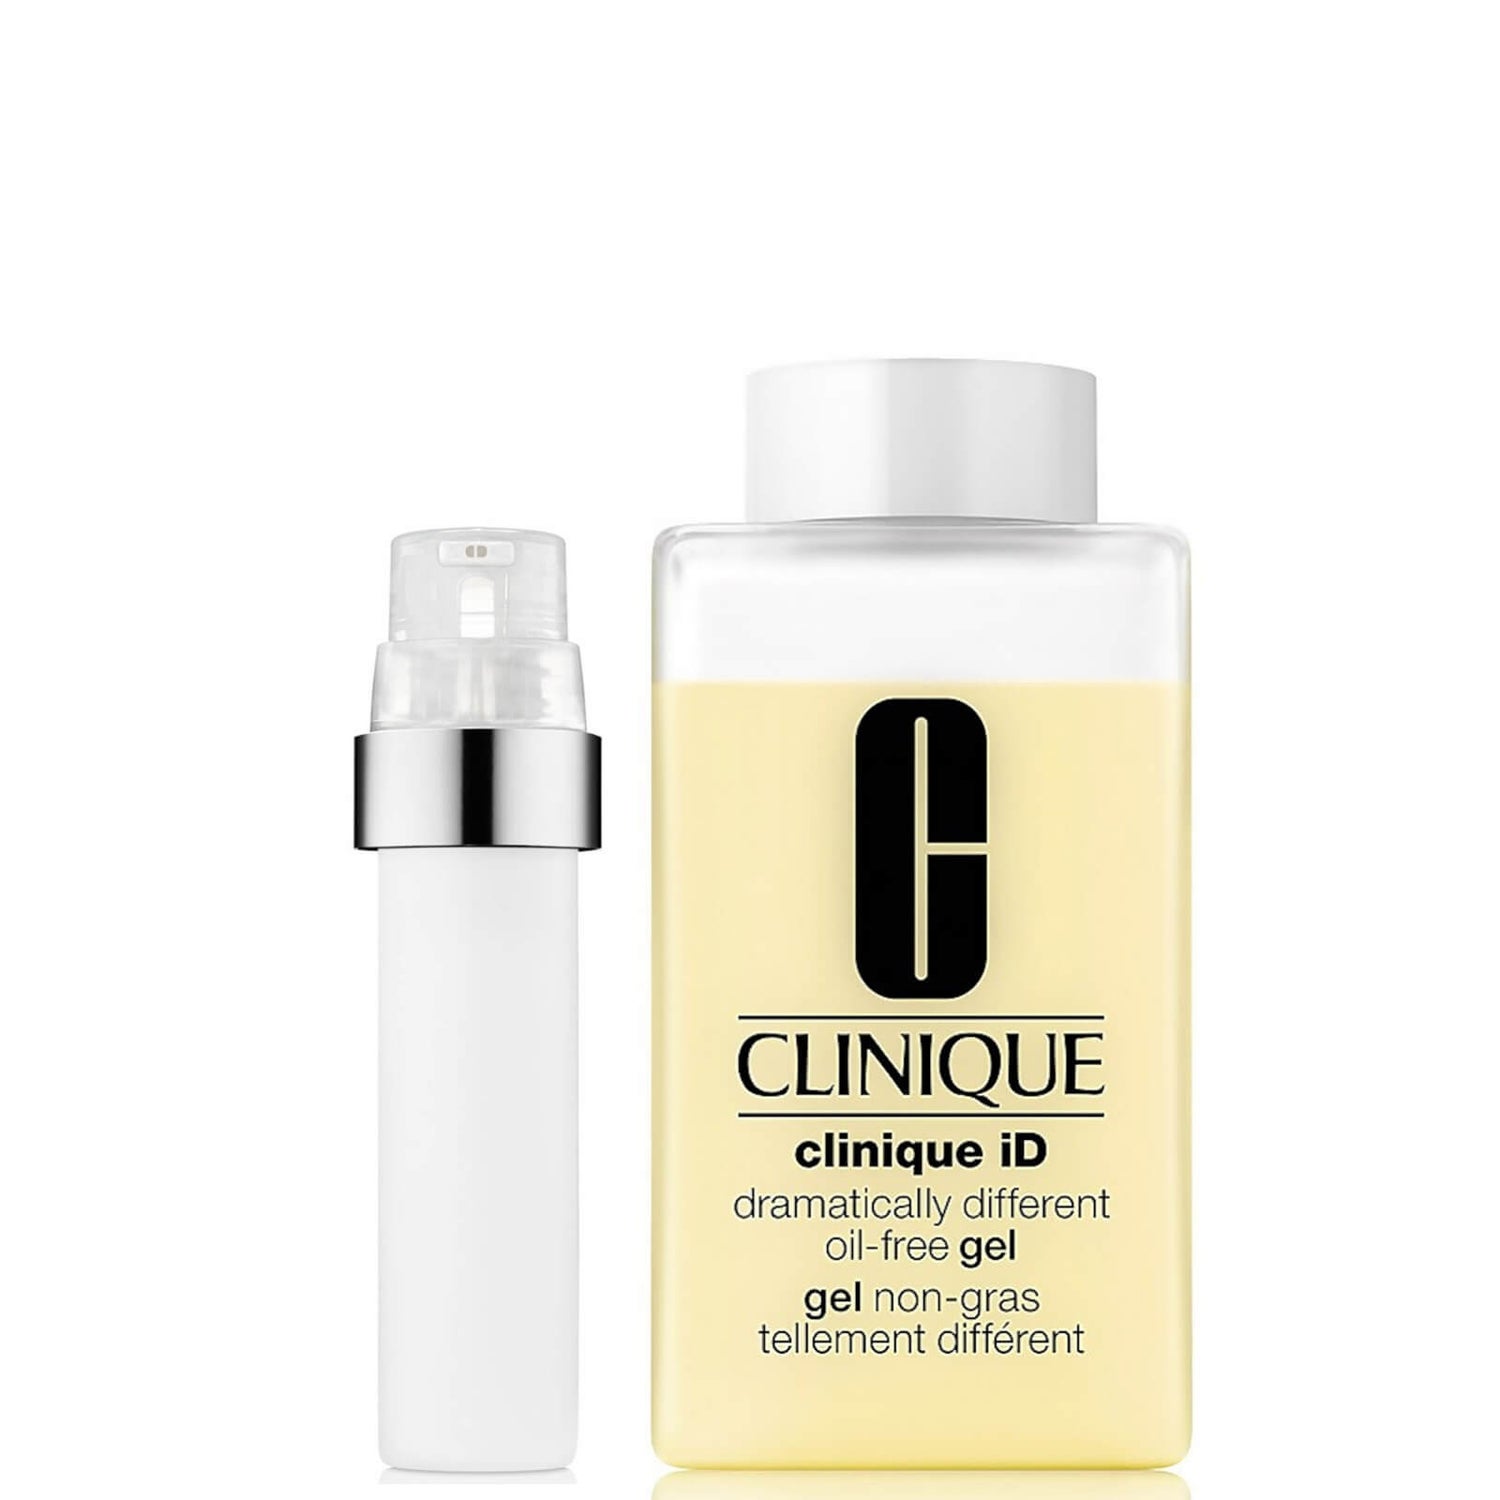 Clinique iD Dramatically Different Oil-Free Gel and Active Cartridge Concentrate for Uneven Skin Tone Bundle